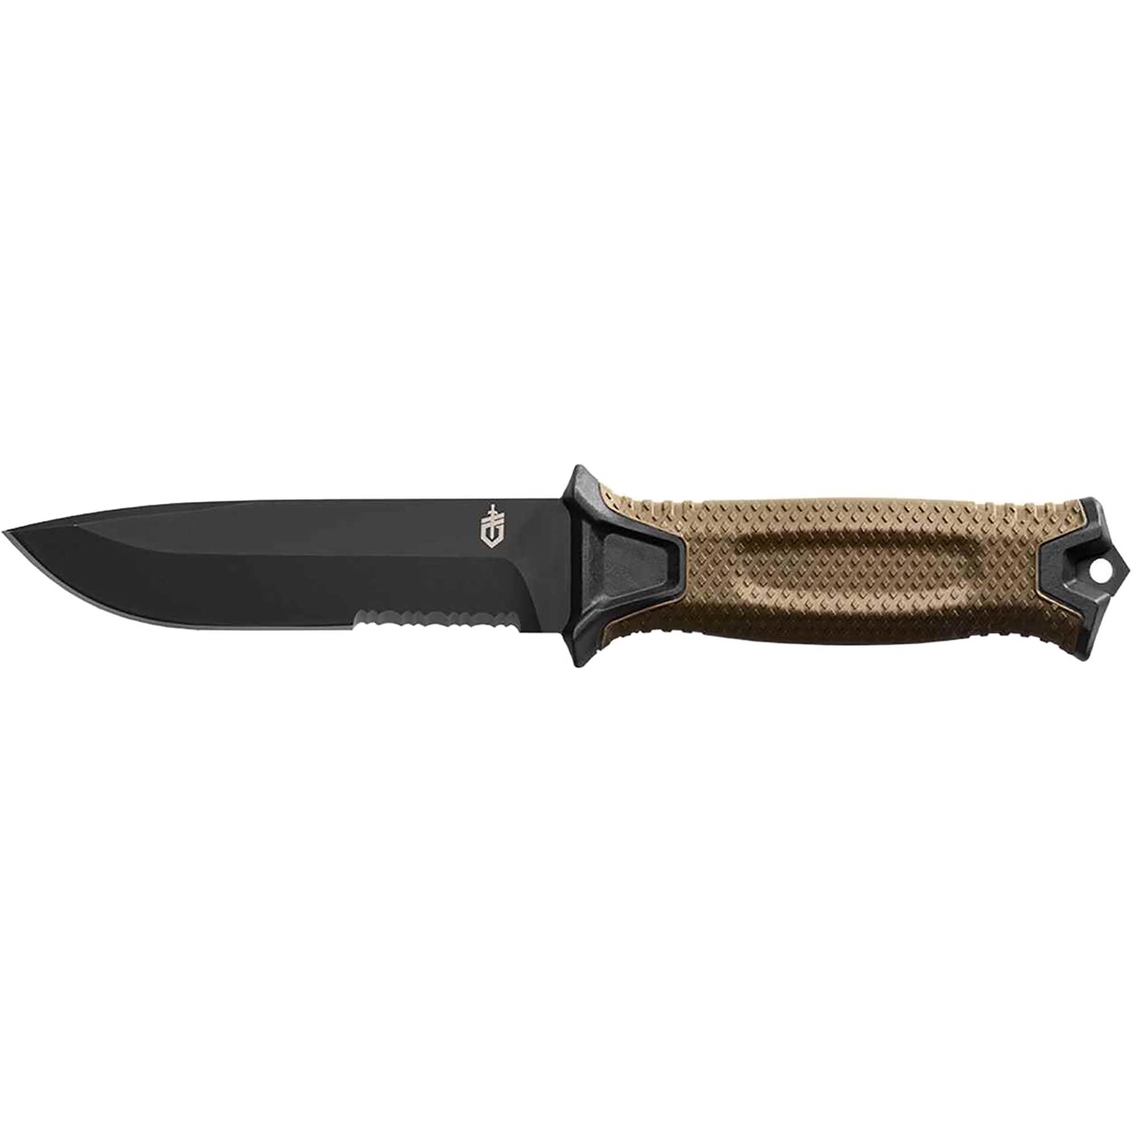 Gerber Knives and Tools StrongArm Fixed Blade Serrated Knife - Image 1 of 3